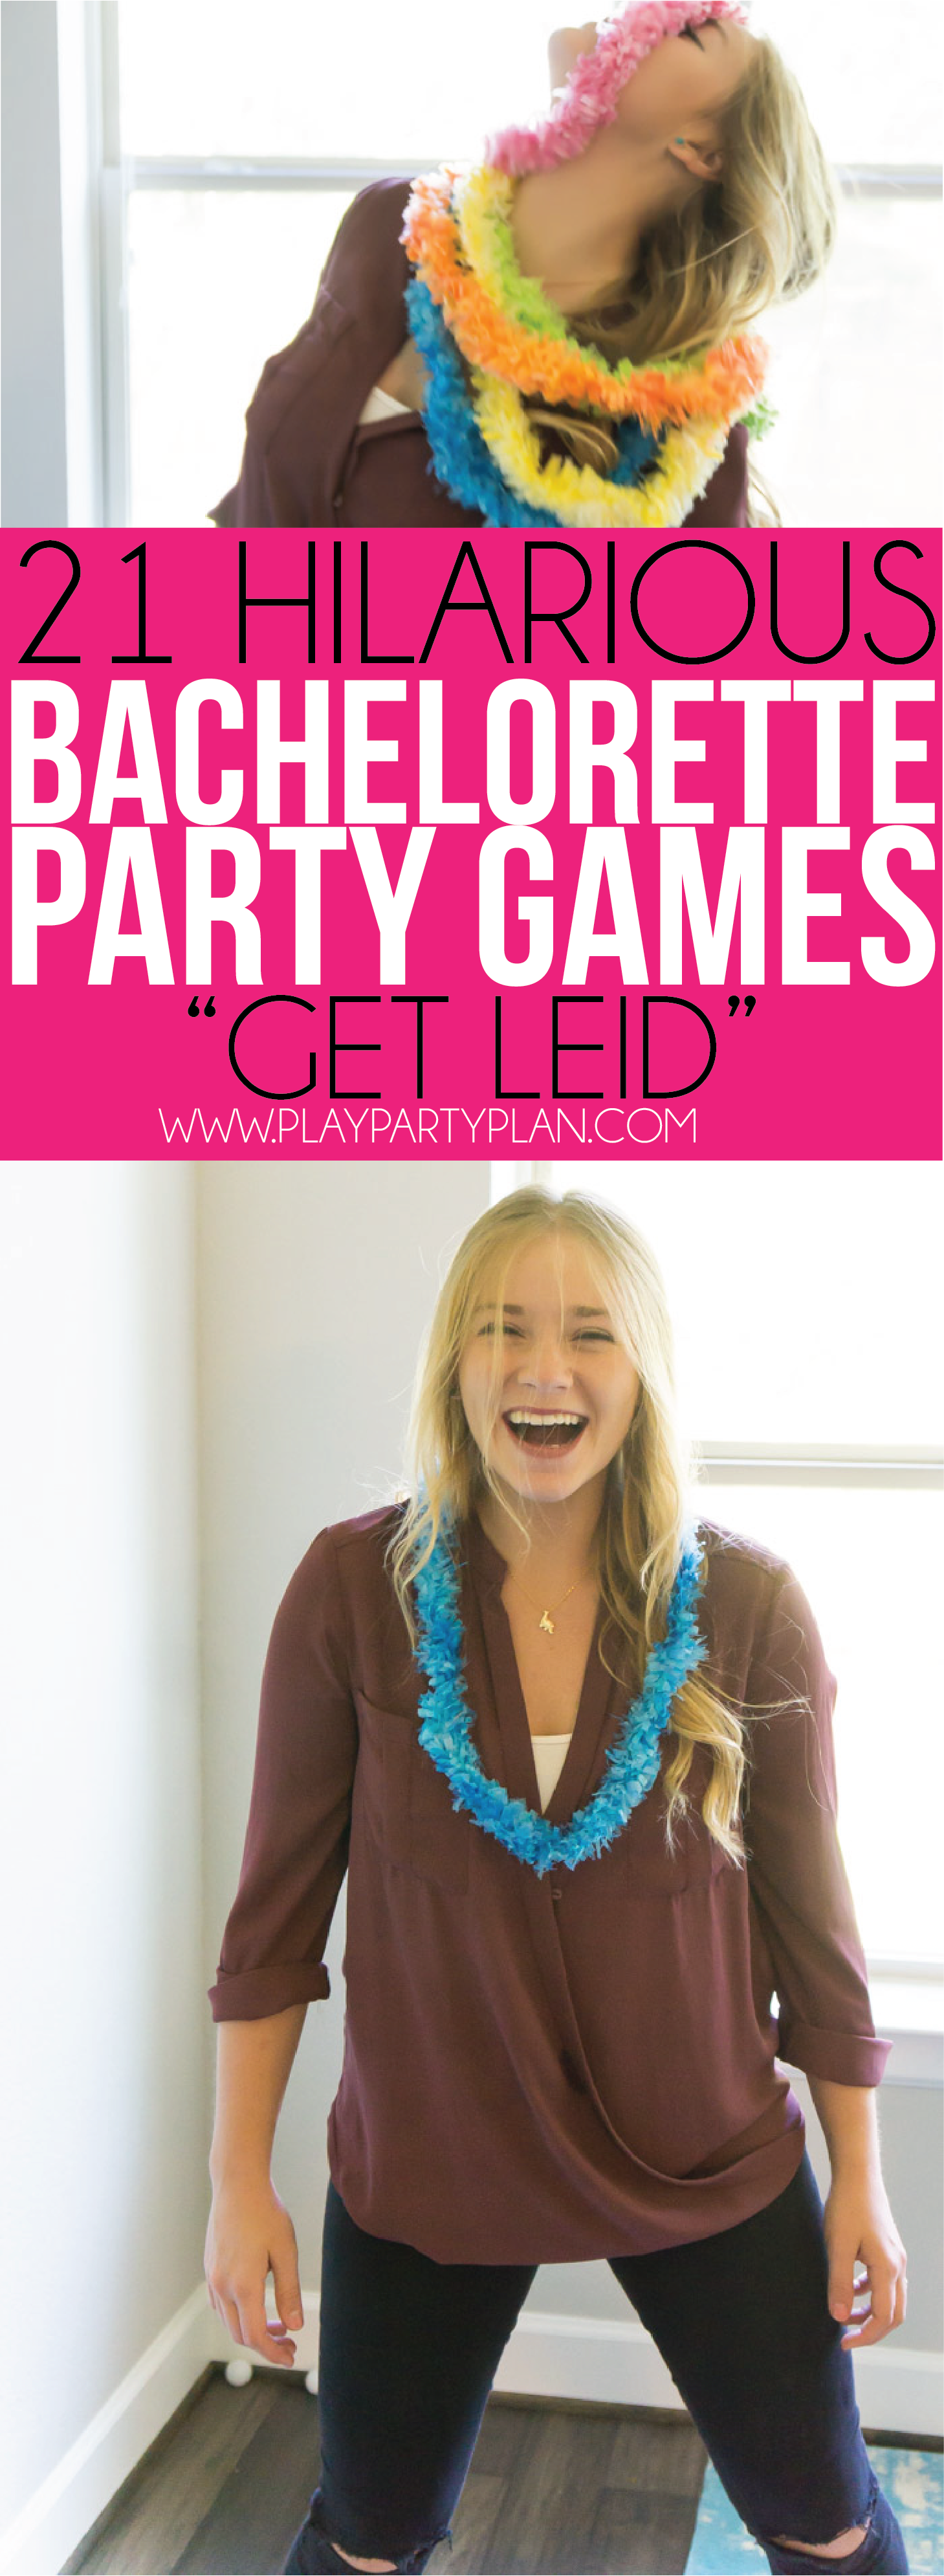 Use plastic leis for fun in these silly bachelorette party games